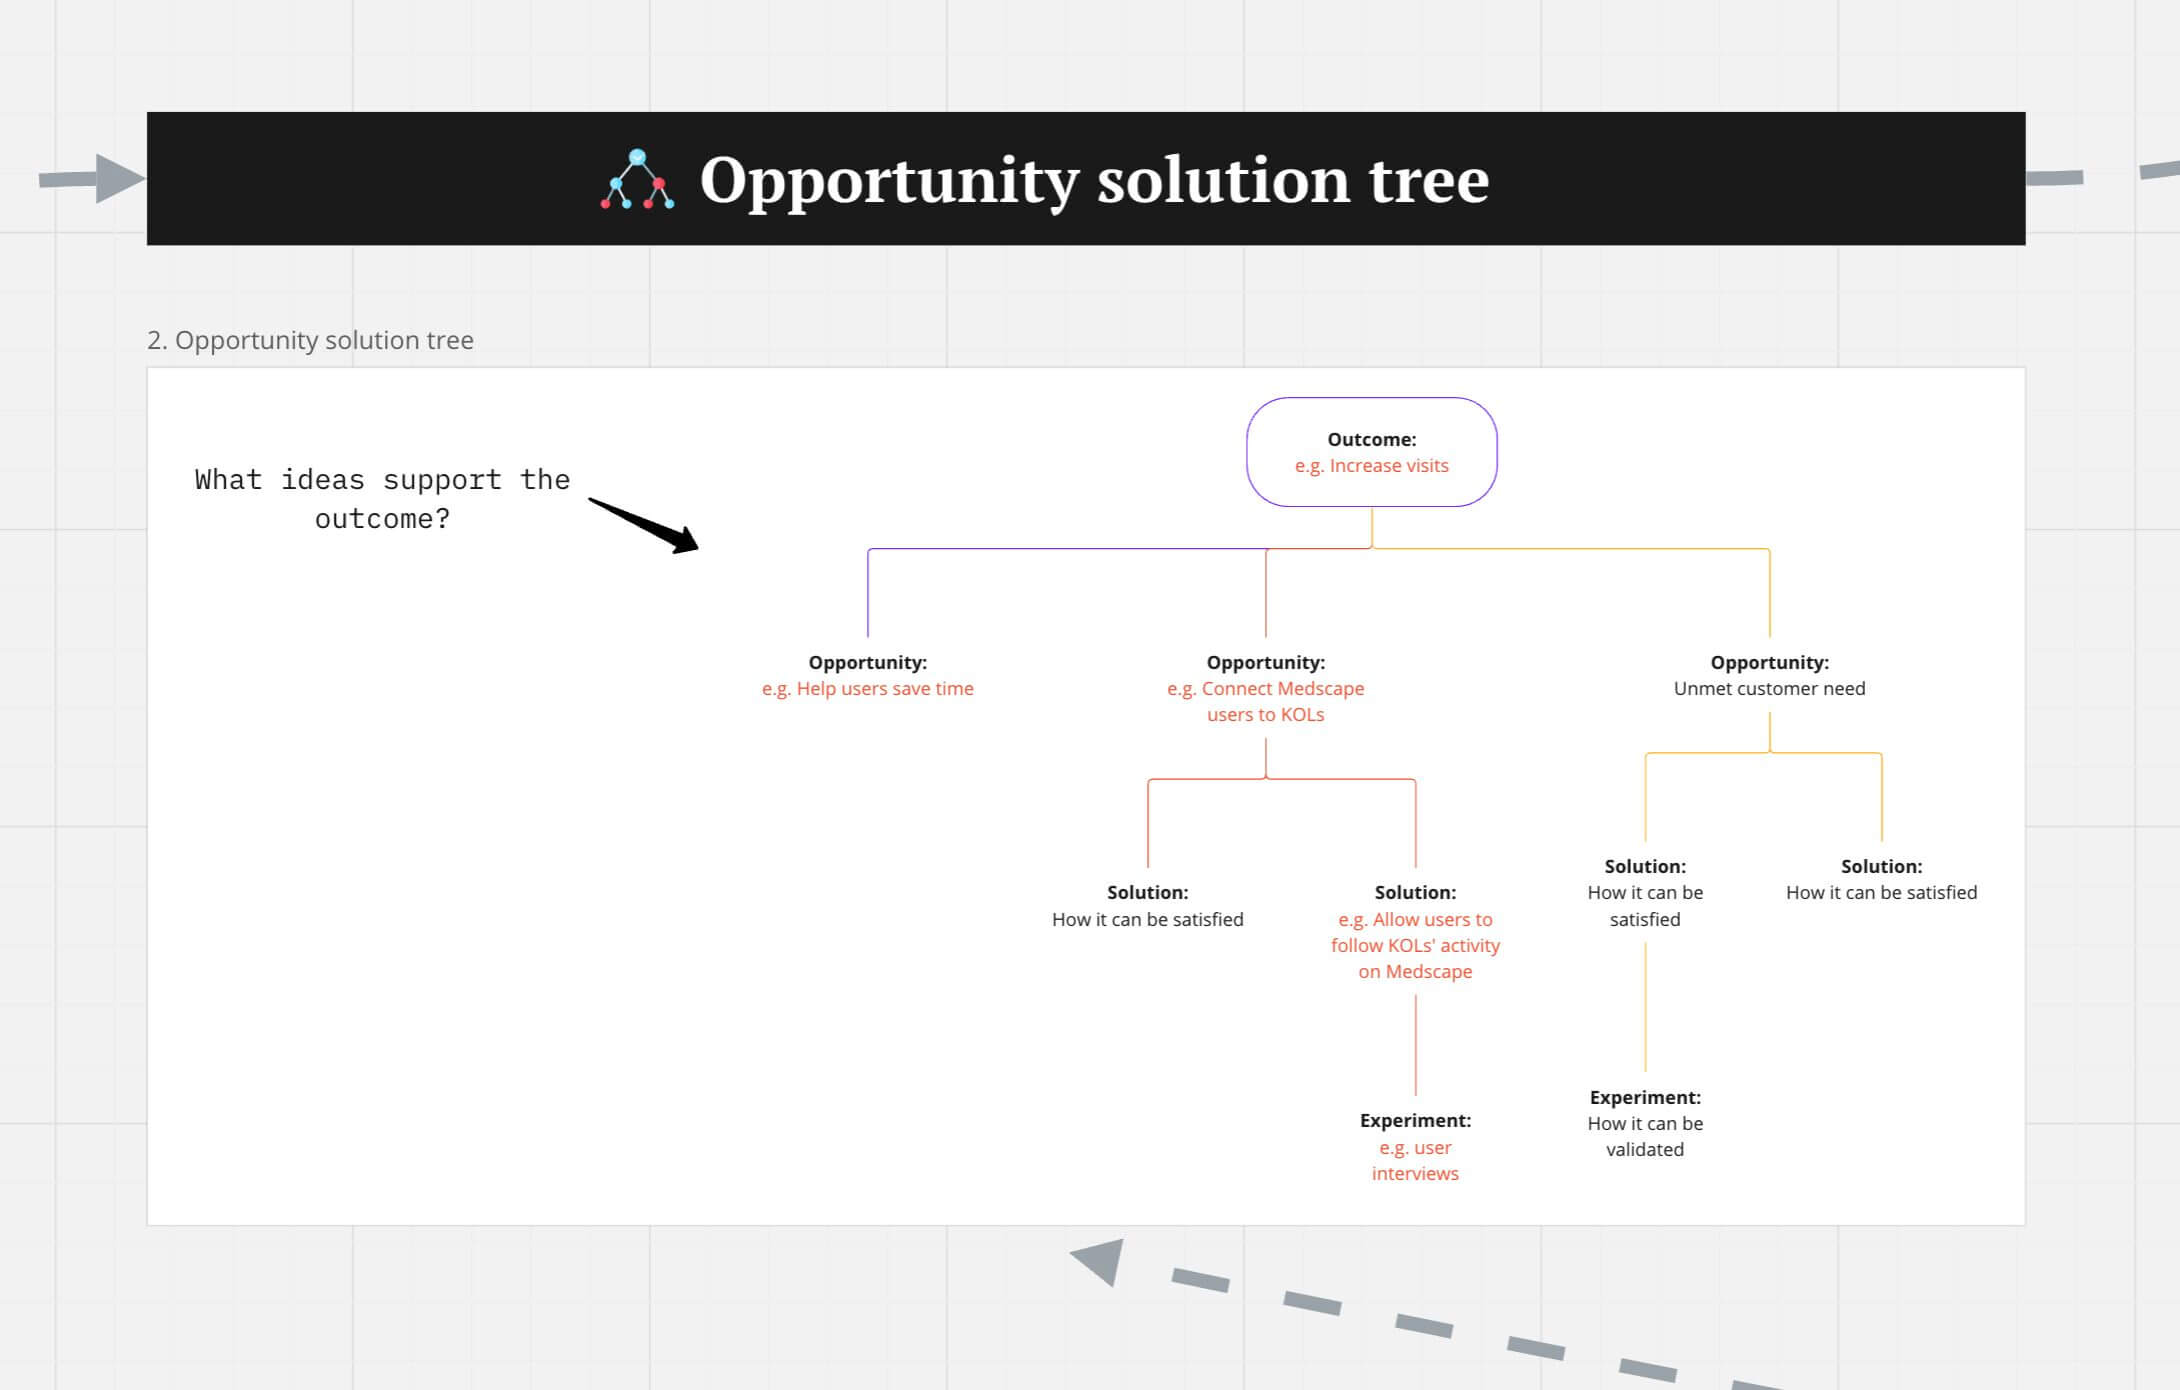 A screenshot of an opportunity solution tree with an outcome at the top, a layer of opportunities below it, and layers of solutions and experiments below.